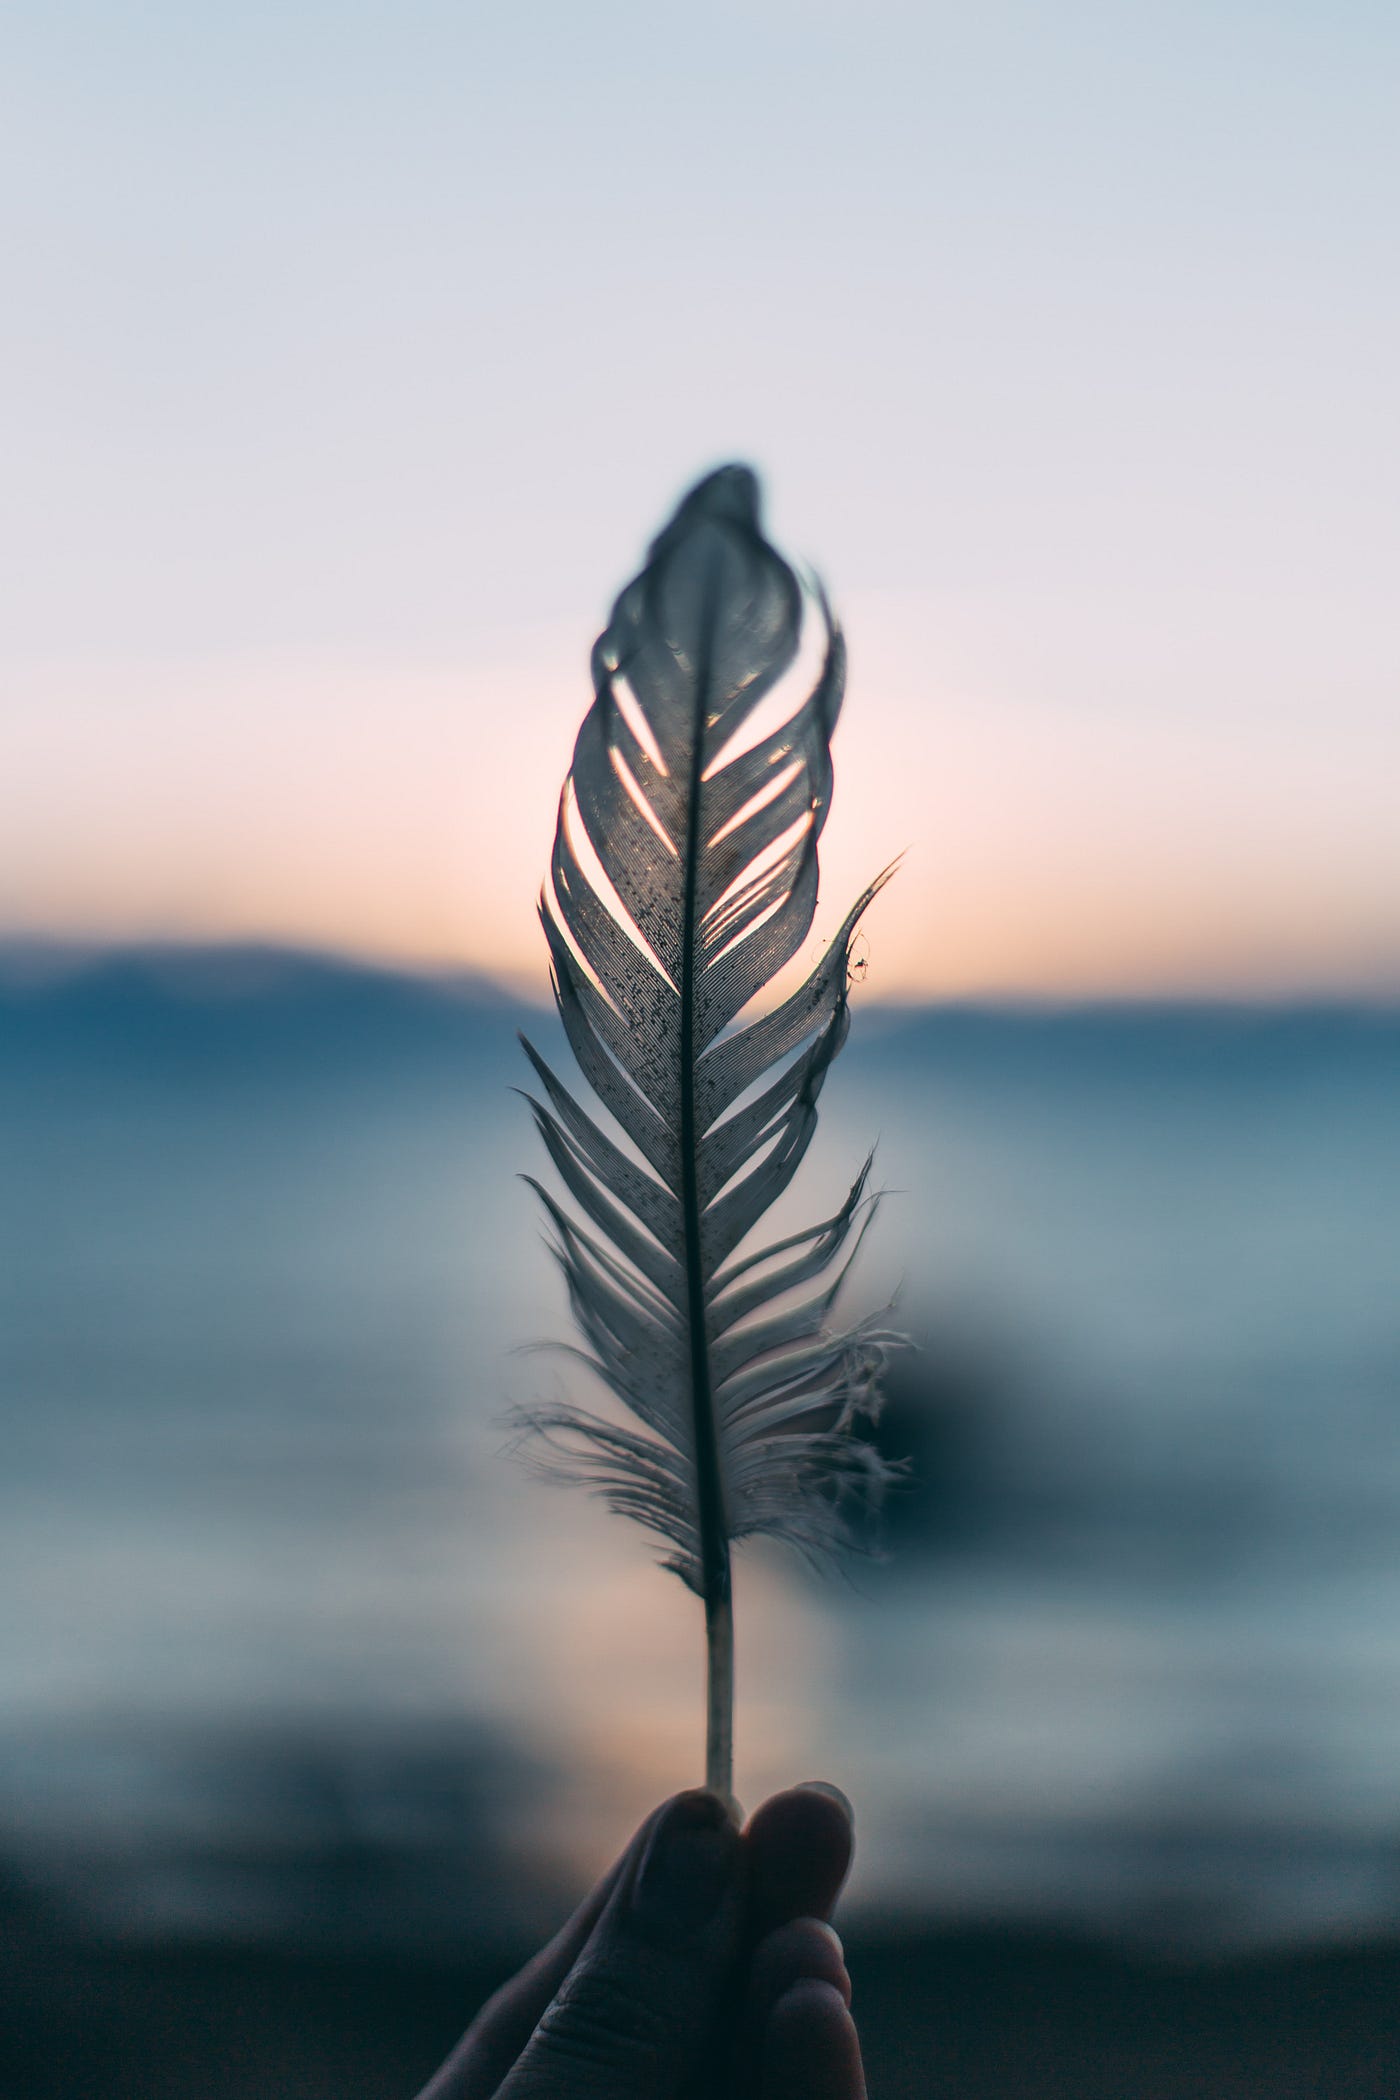 A feather against a blurred backdrop of the ocean.